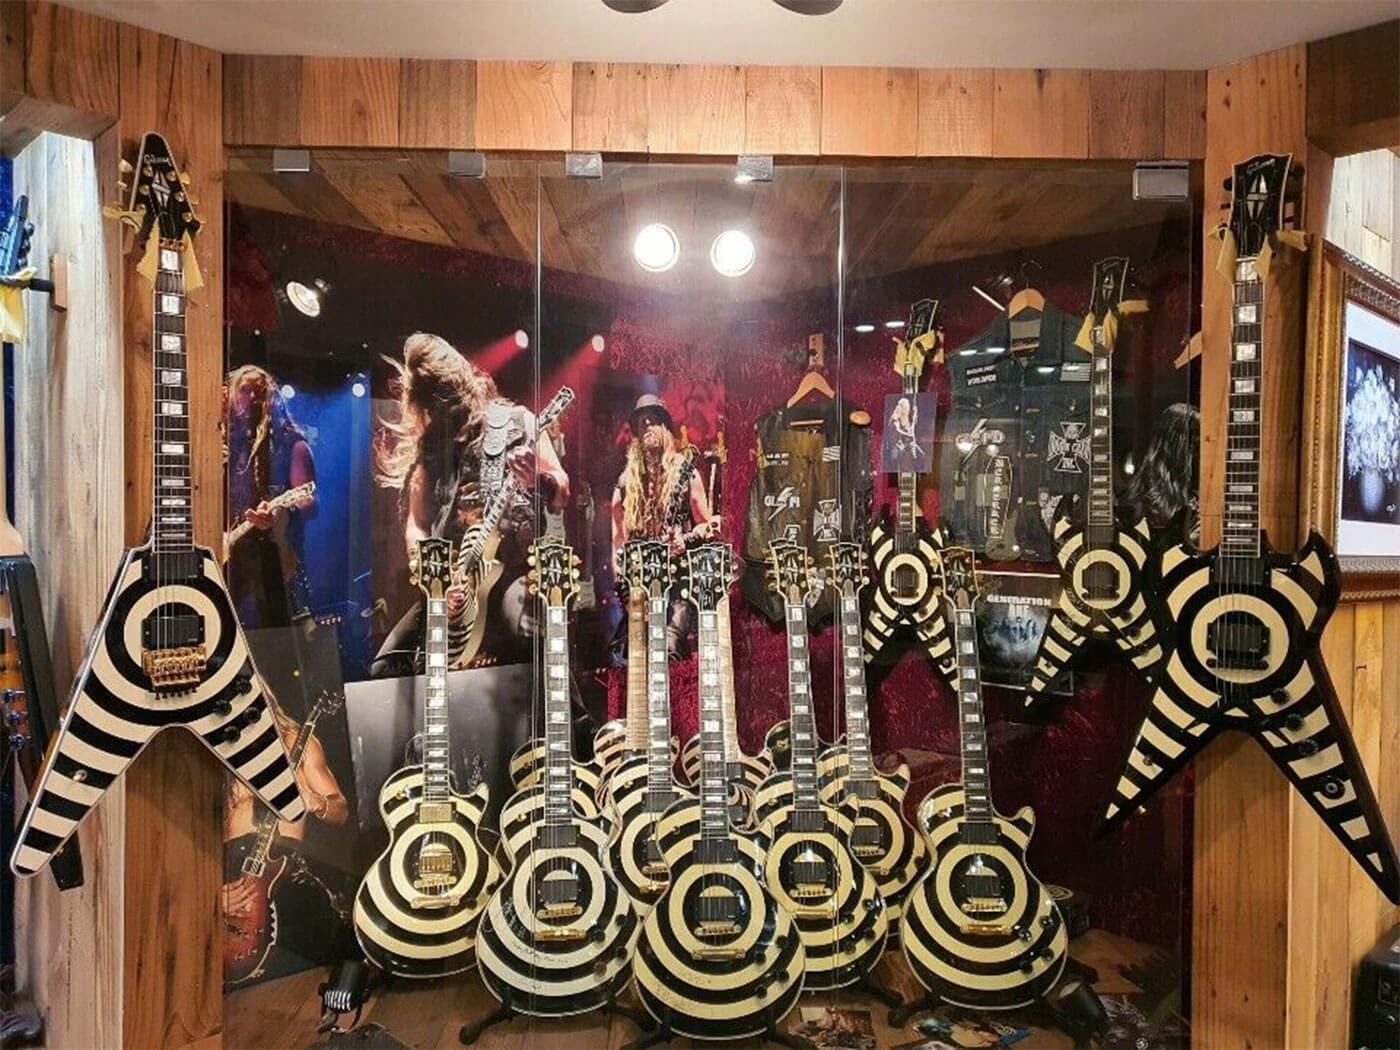 Part of the world's largest Zakk Wylde collection